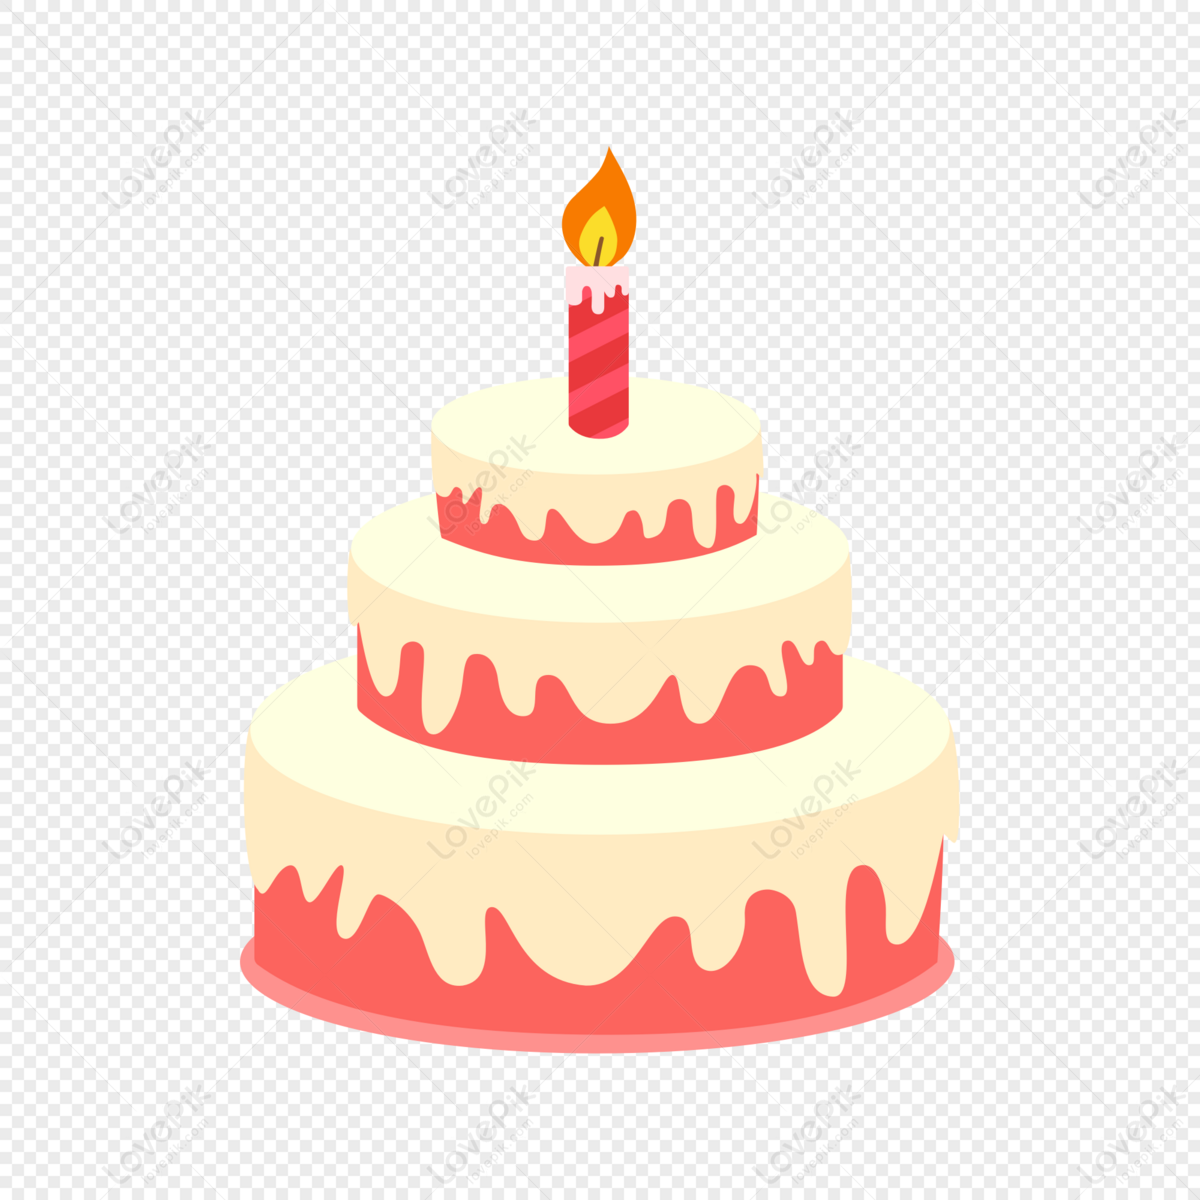 Birthday Cake PNG Transparent And Clipart Image For Free Download - Lovepik  | 401061976